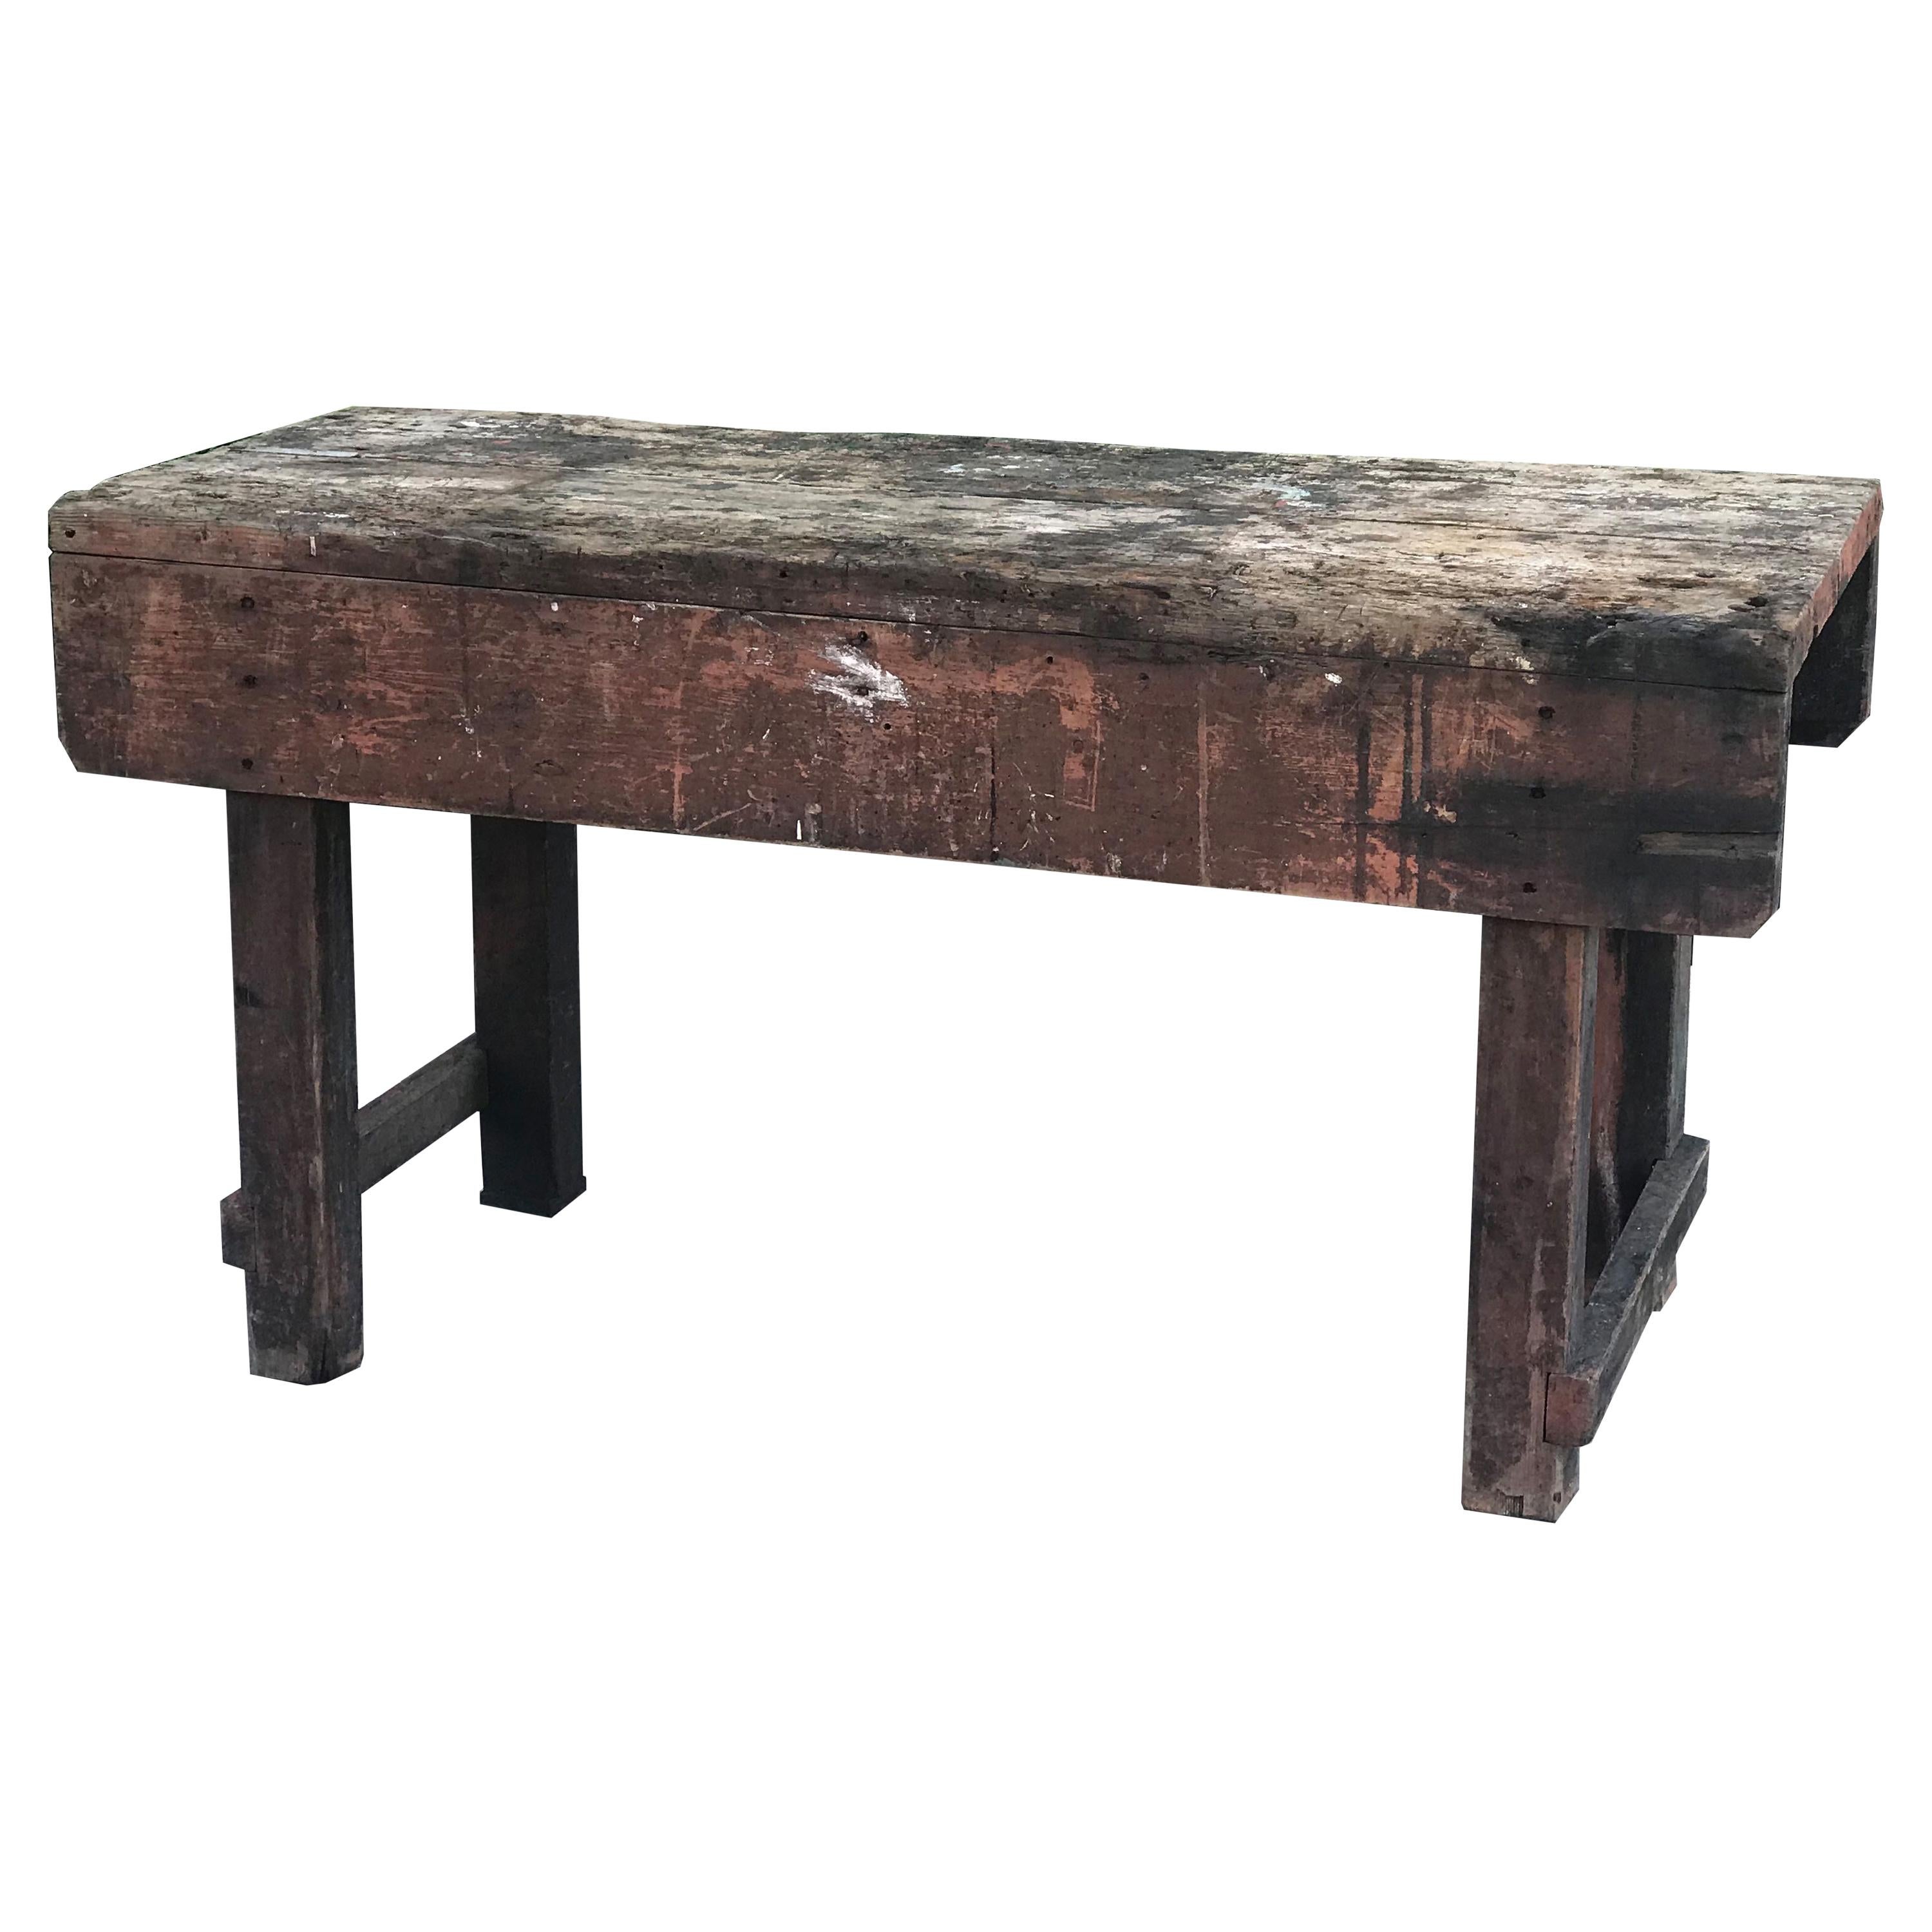 Late 19th Century Rustic Industrial Work Table from France